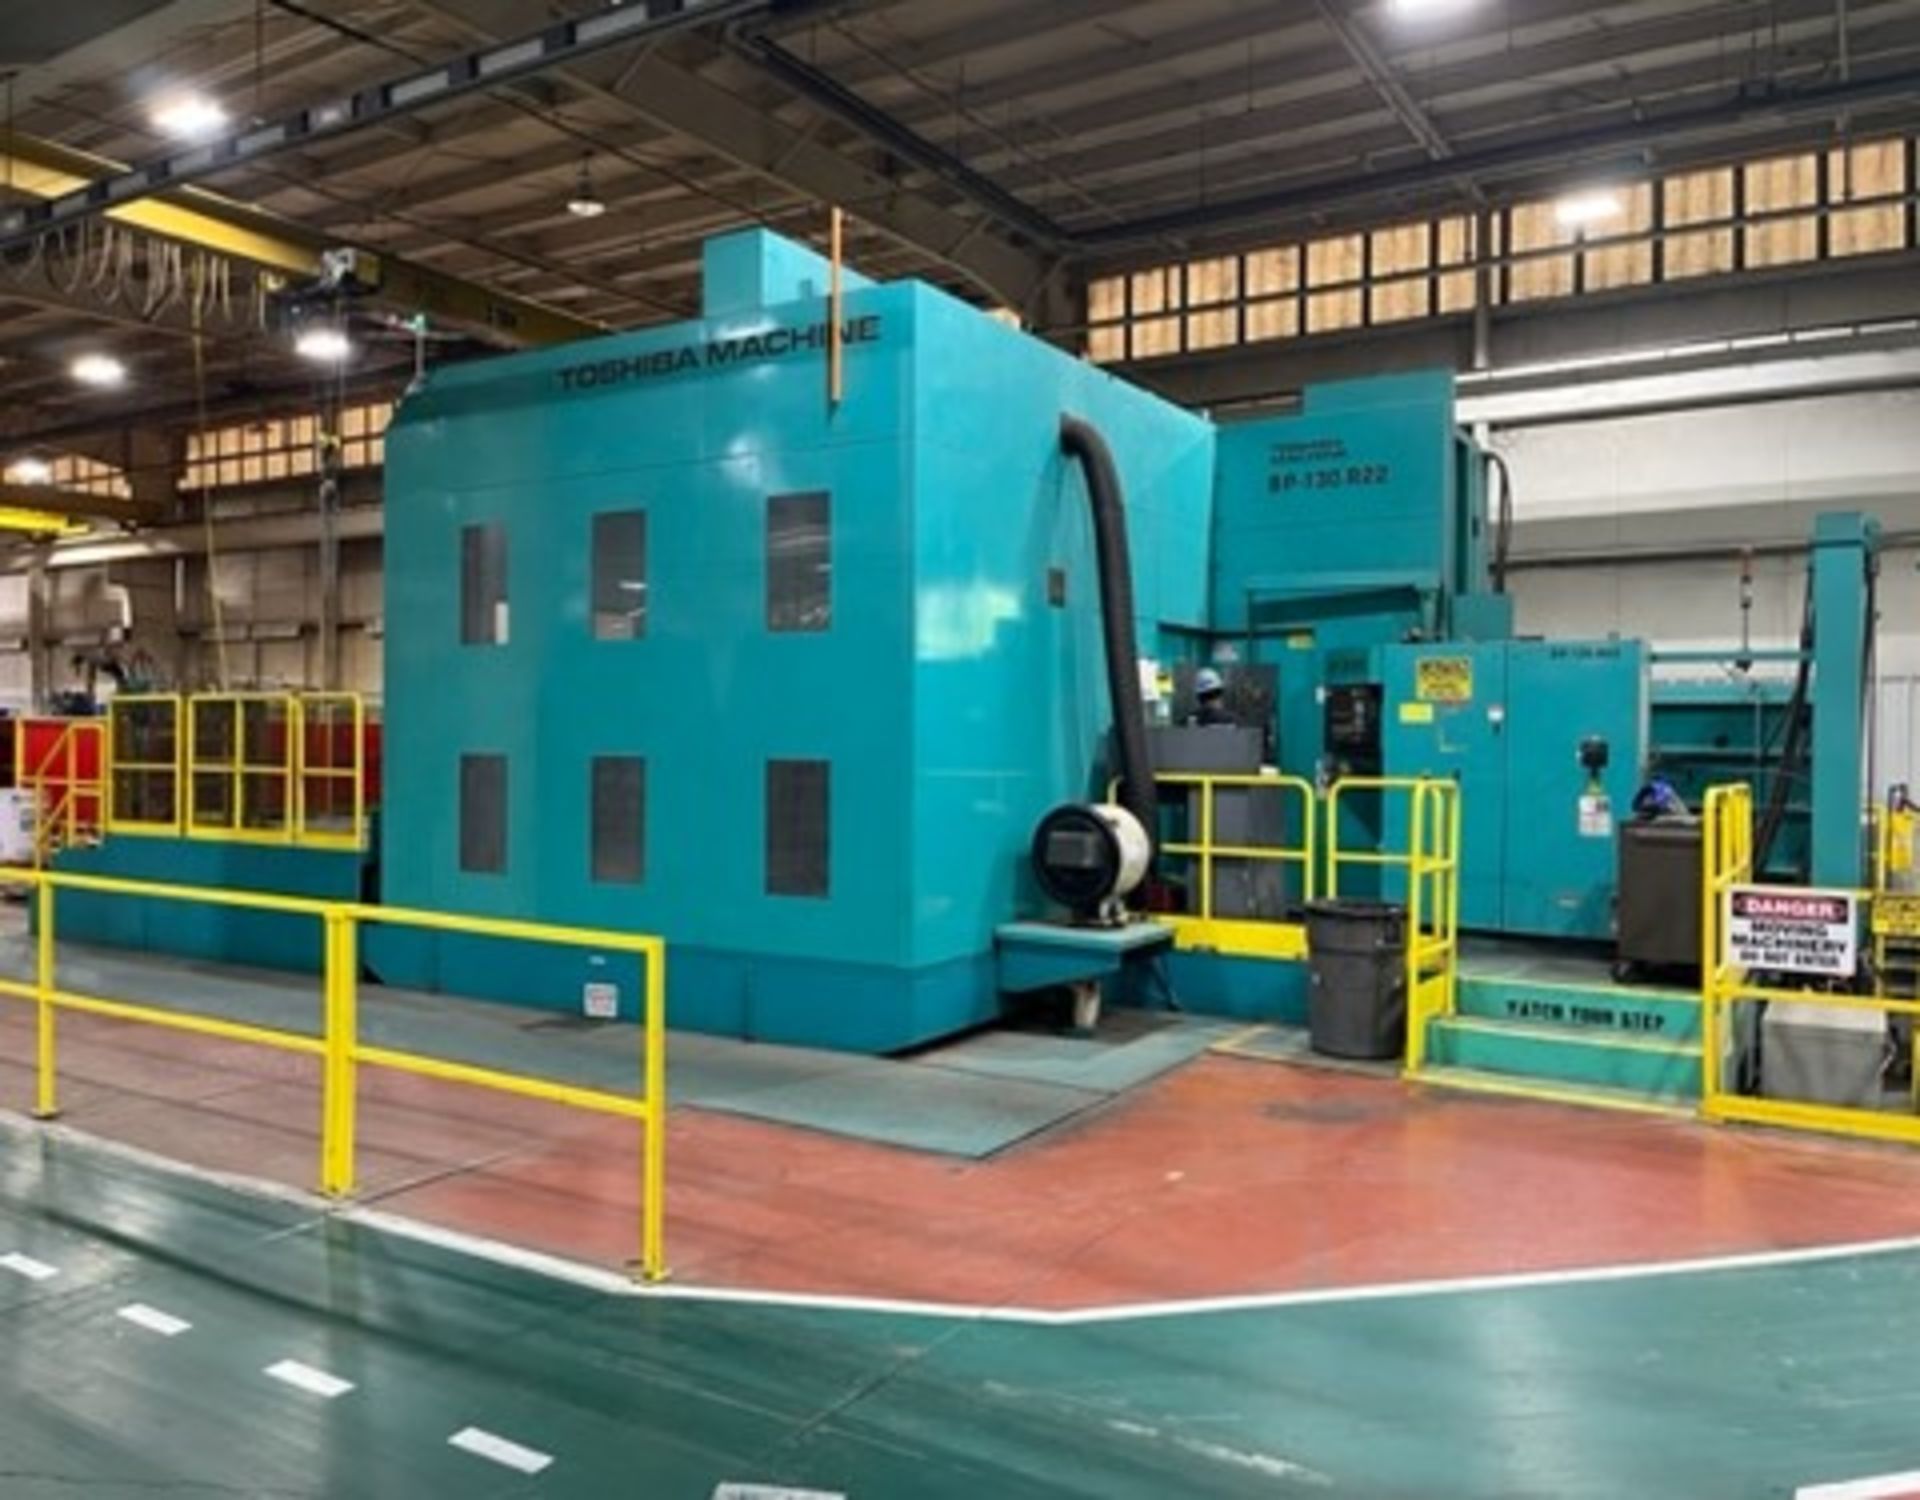 Toshiba BP-130-R22 5-Axis Horizontal Boring & Milling Machine (NOTE: LOCATED IN NEWBERRY, SOUTH CARO